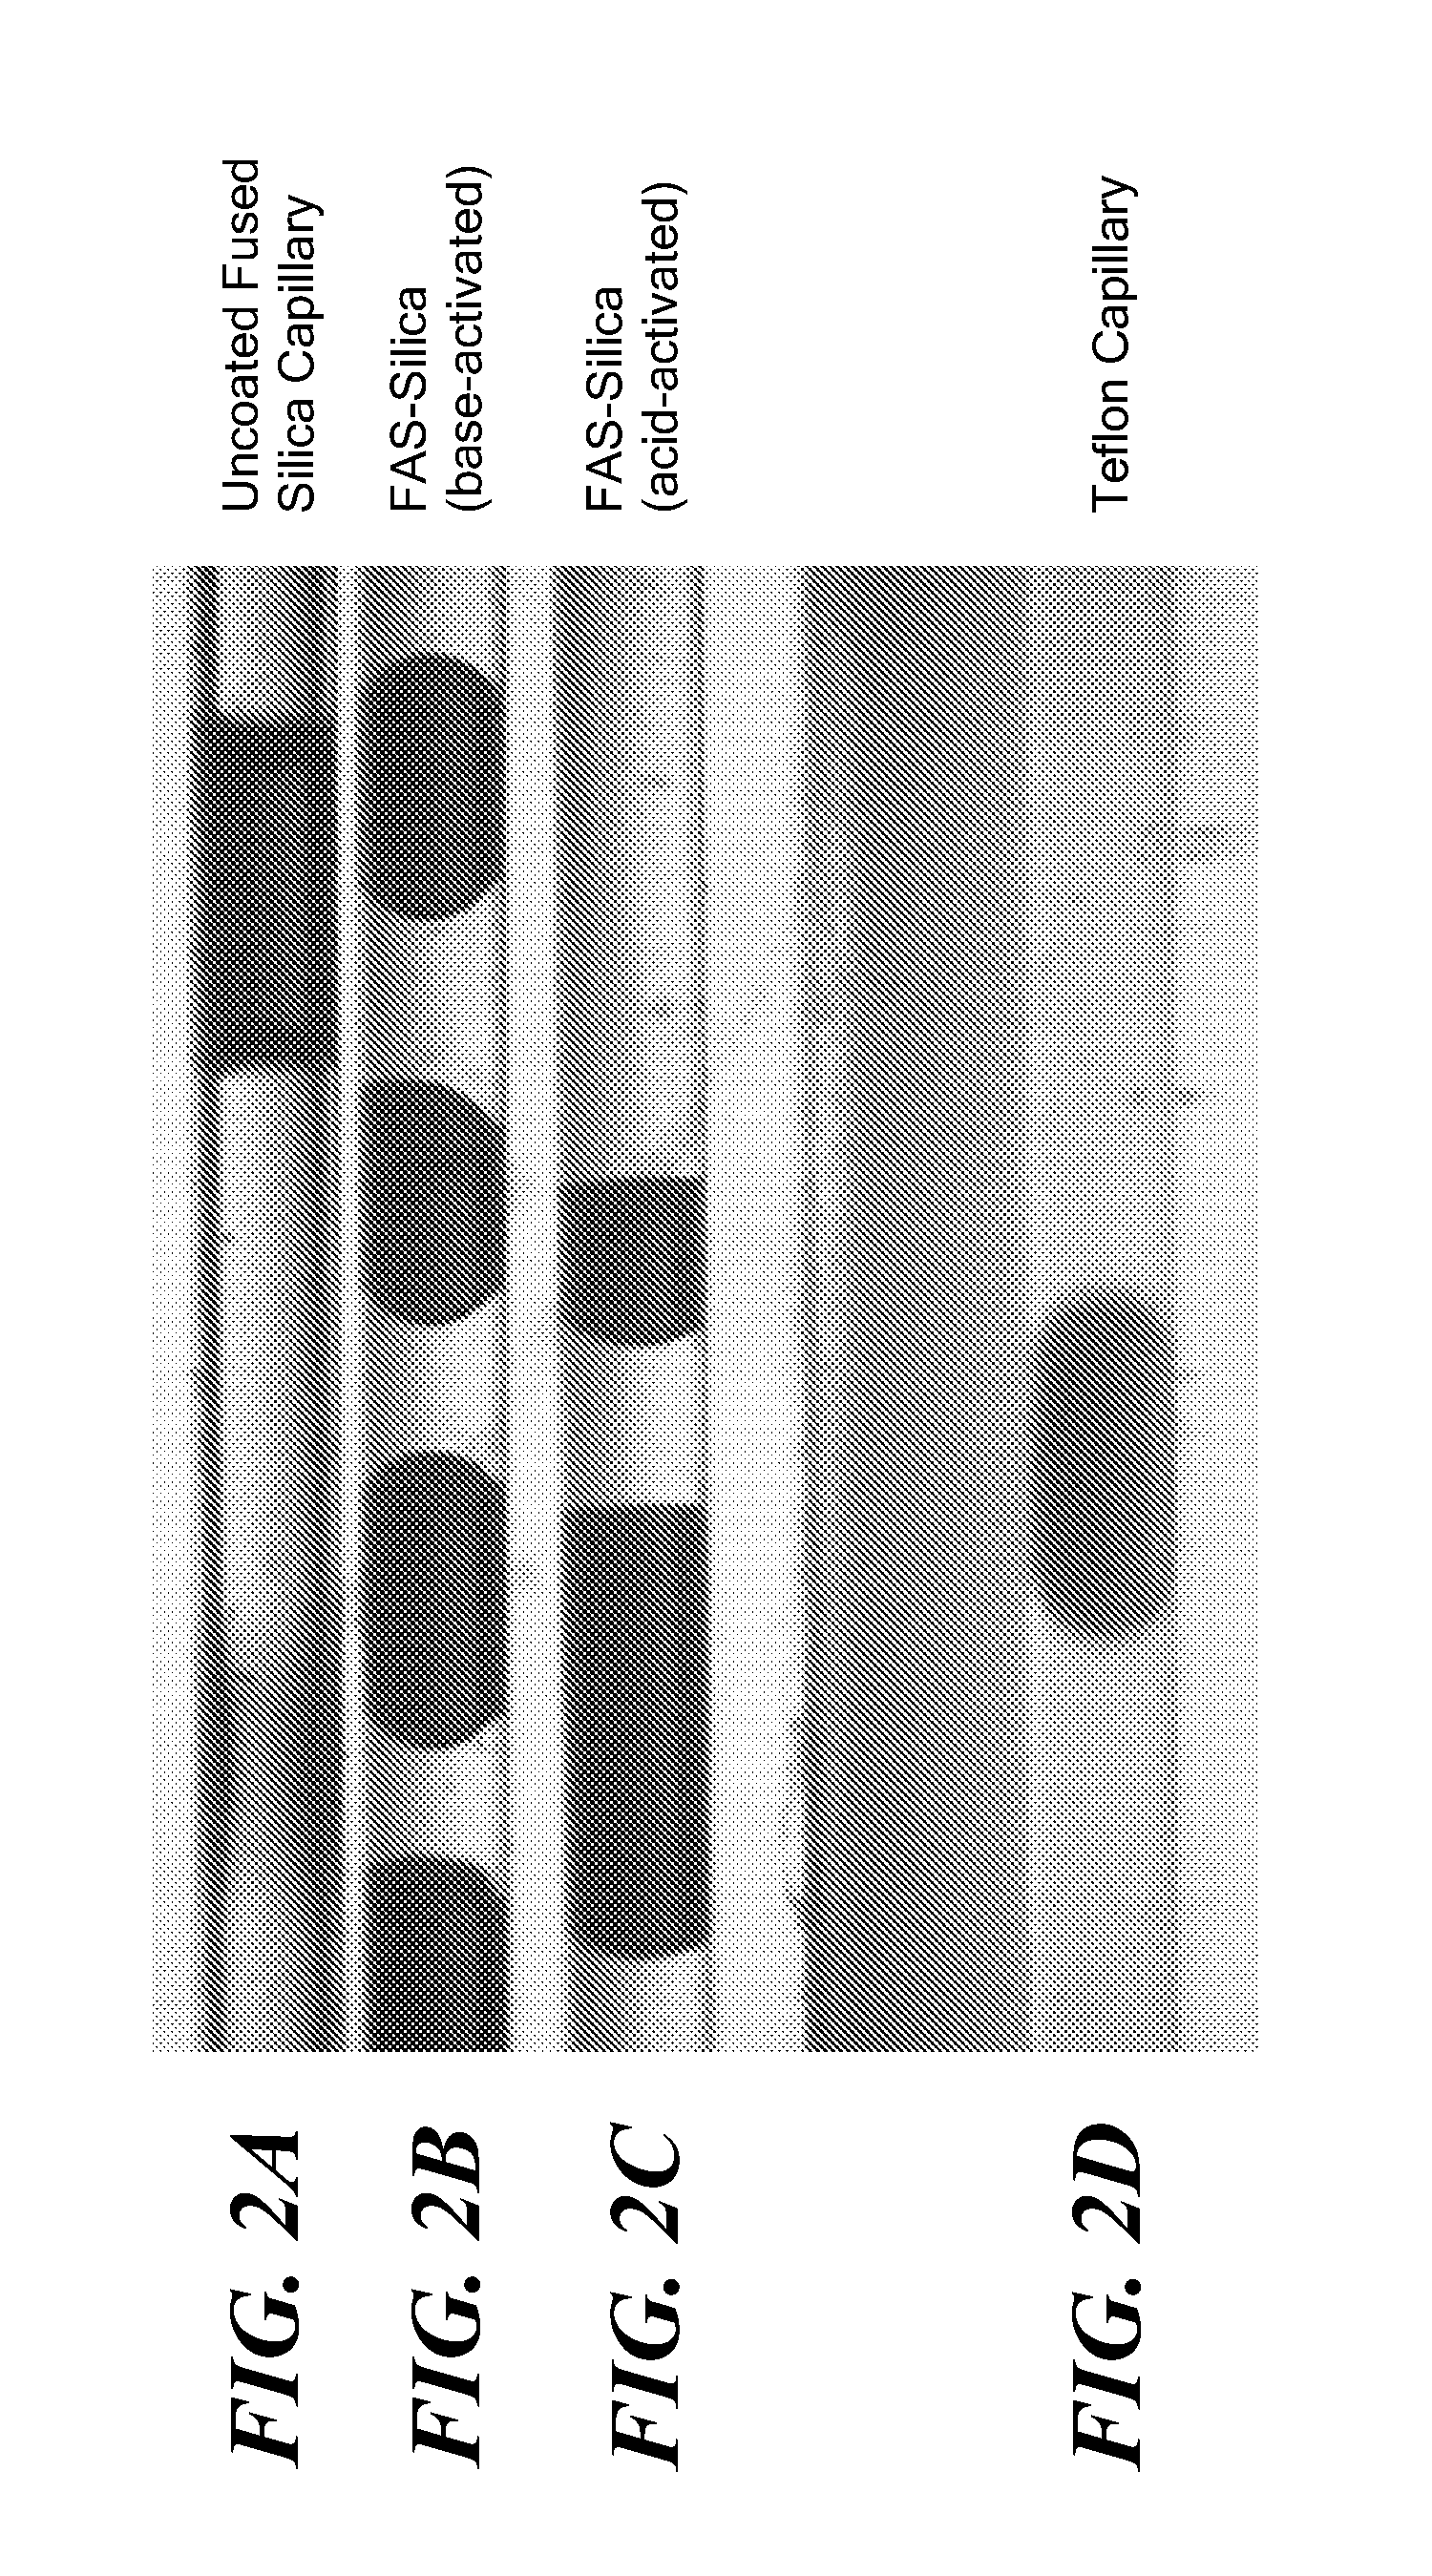 Method for efficient transport of small liquid volumes to, from or within microfluidic devices